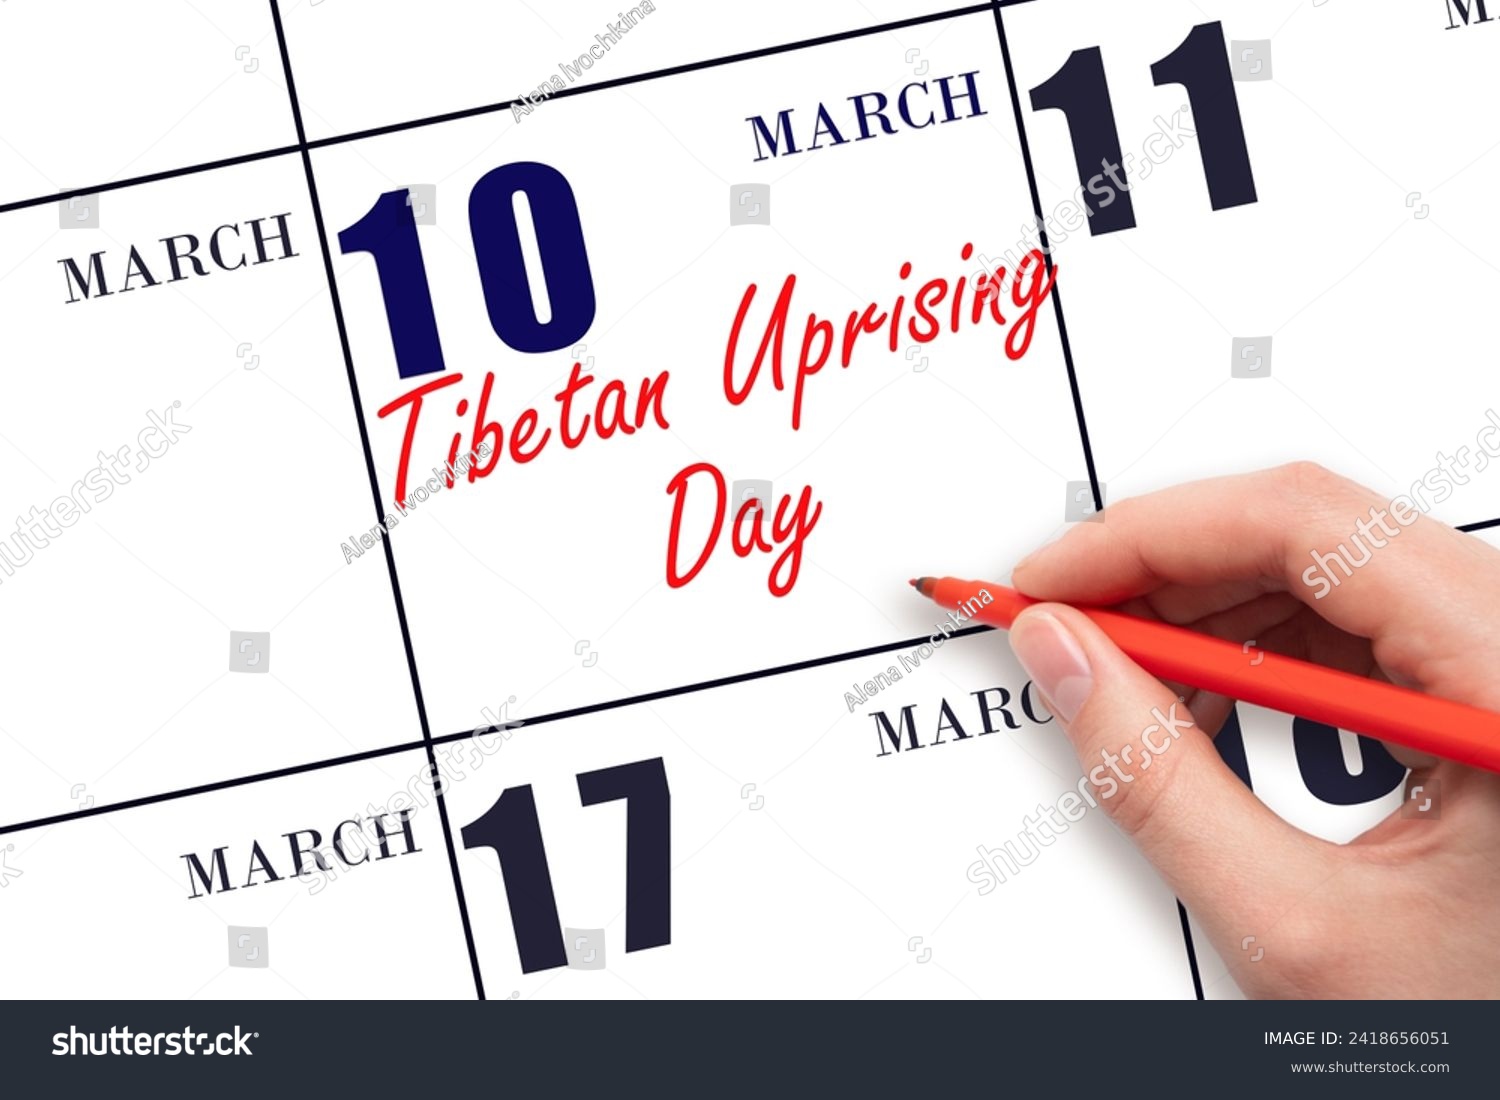 March 10. Hand writing text Tibetan Uprising Day on calendar date. Save the date. Holiday. Day of the year concept. #2418656051